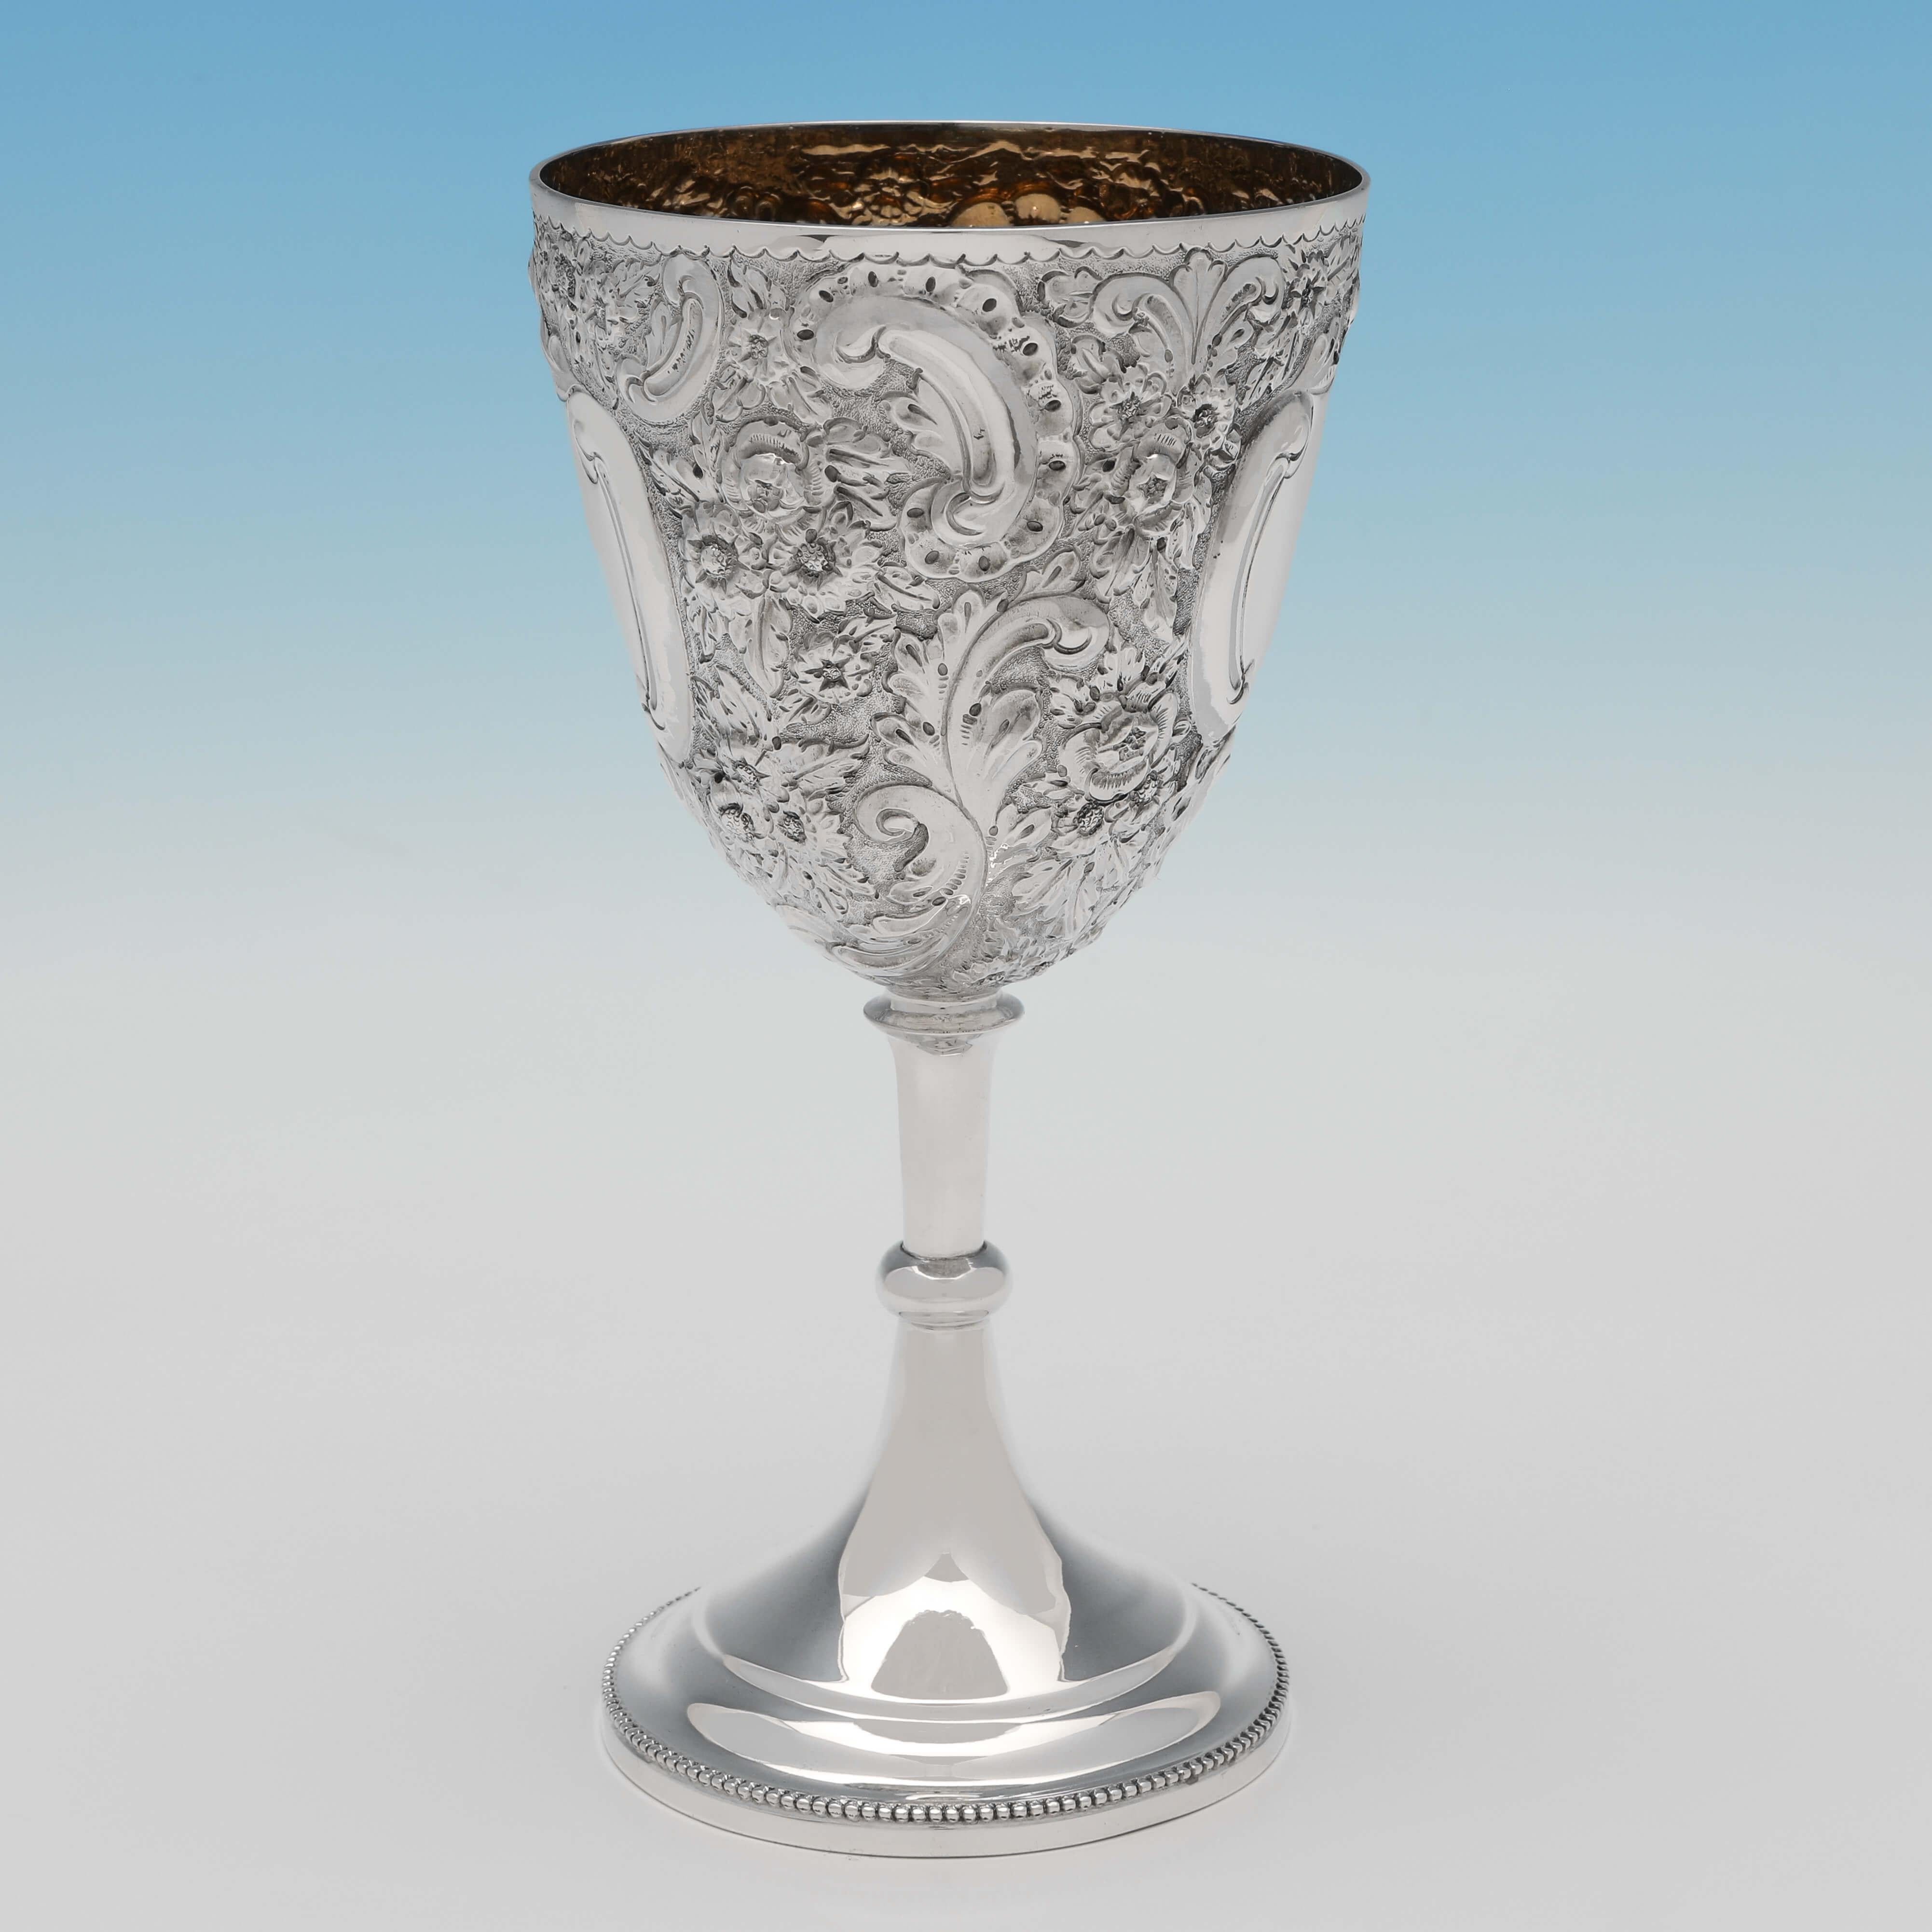 Hallmarked in Birmingham in 1894 by Nathan & Hayes, this attractive, Victorian, Antique Sterling Silver Goblet, is richly decorated with chased floral detailing, and has a gilt interior. The goblet measures 7.75